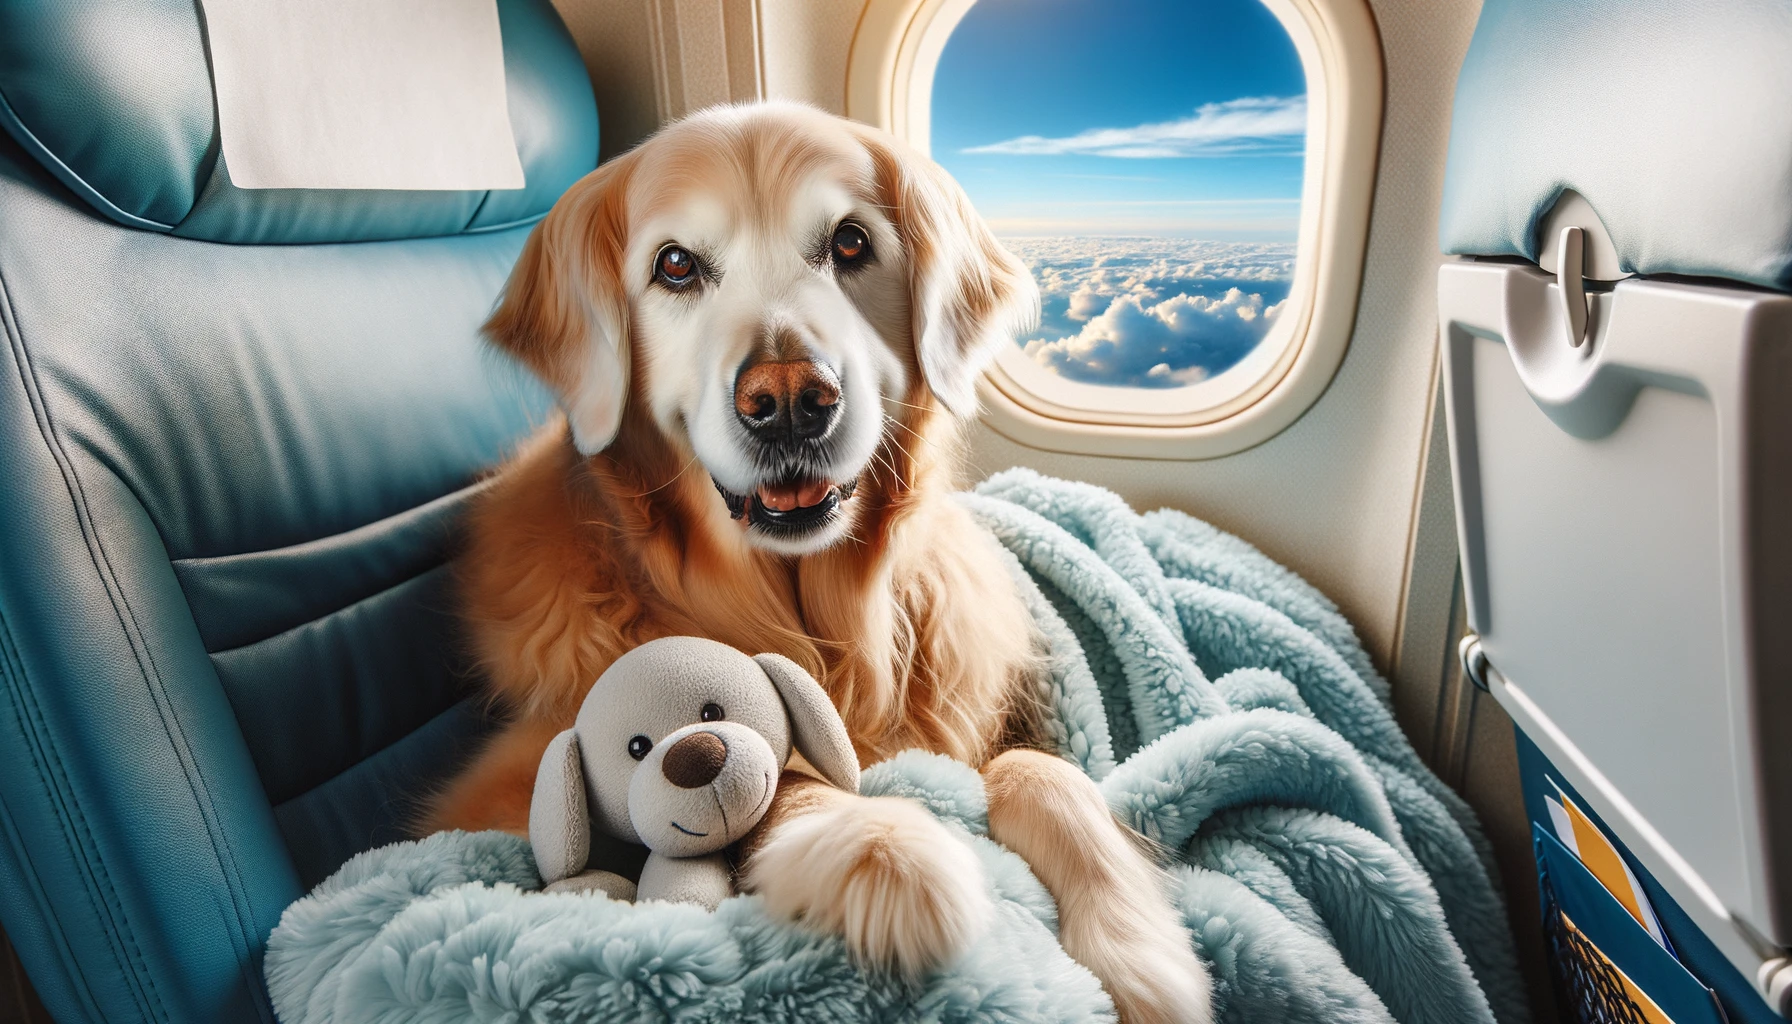 Traveling with elderly pets. An elderly Golden Retriever enjoying air travel with comfort accessories